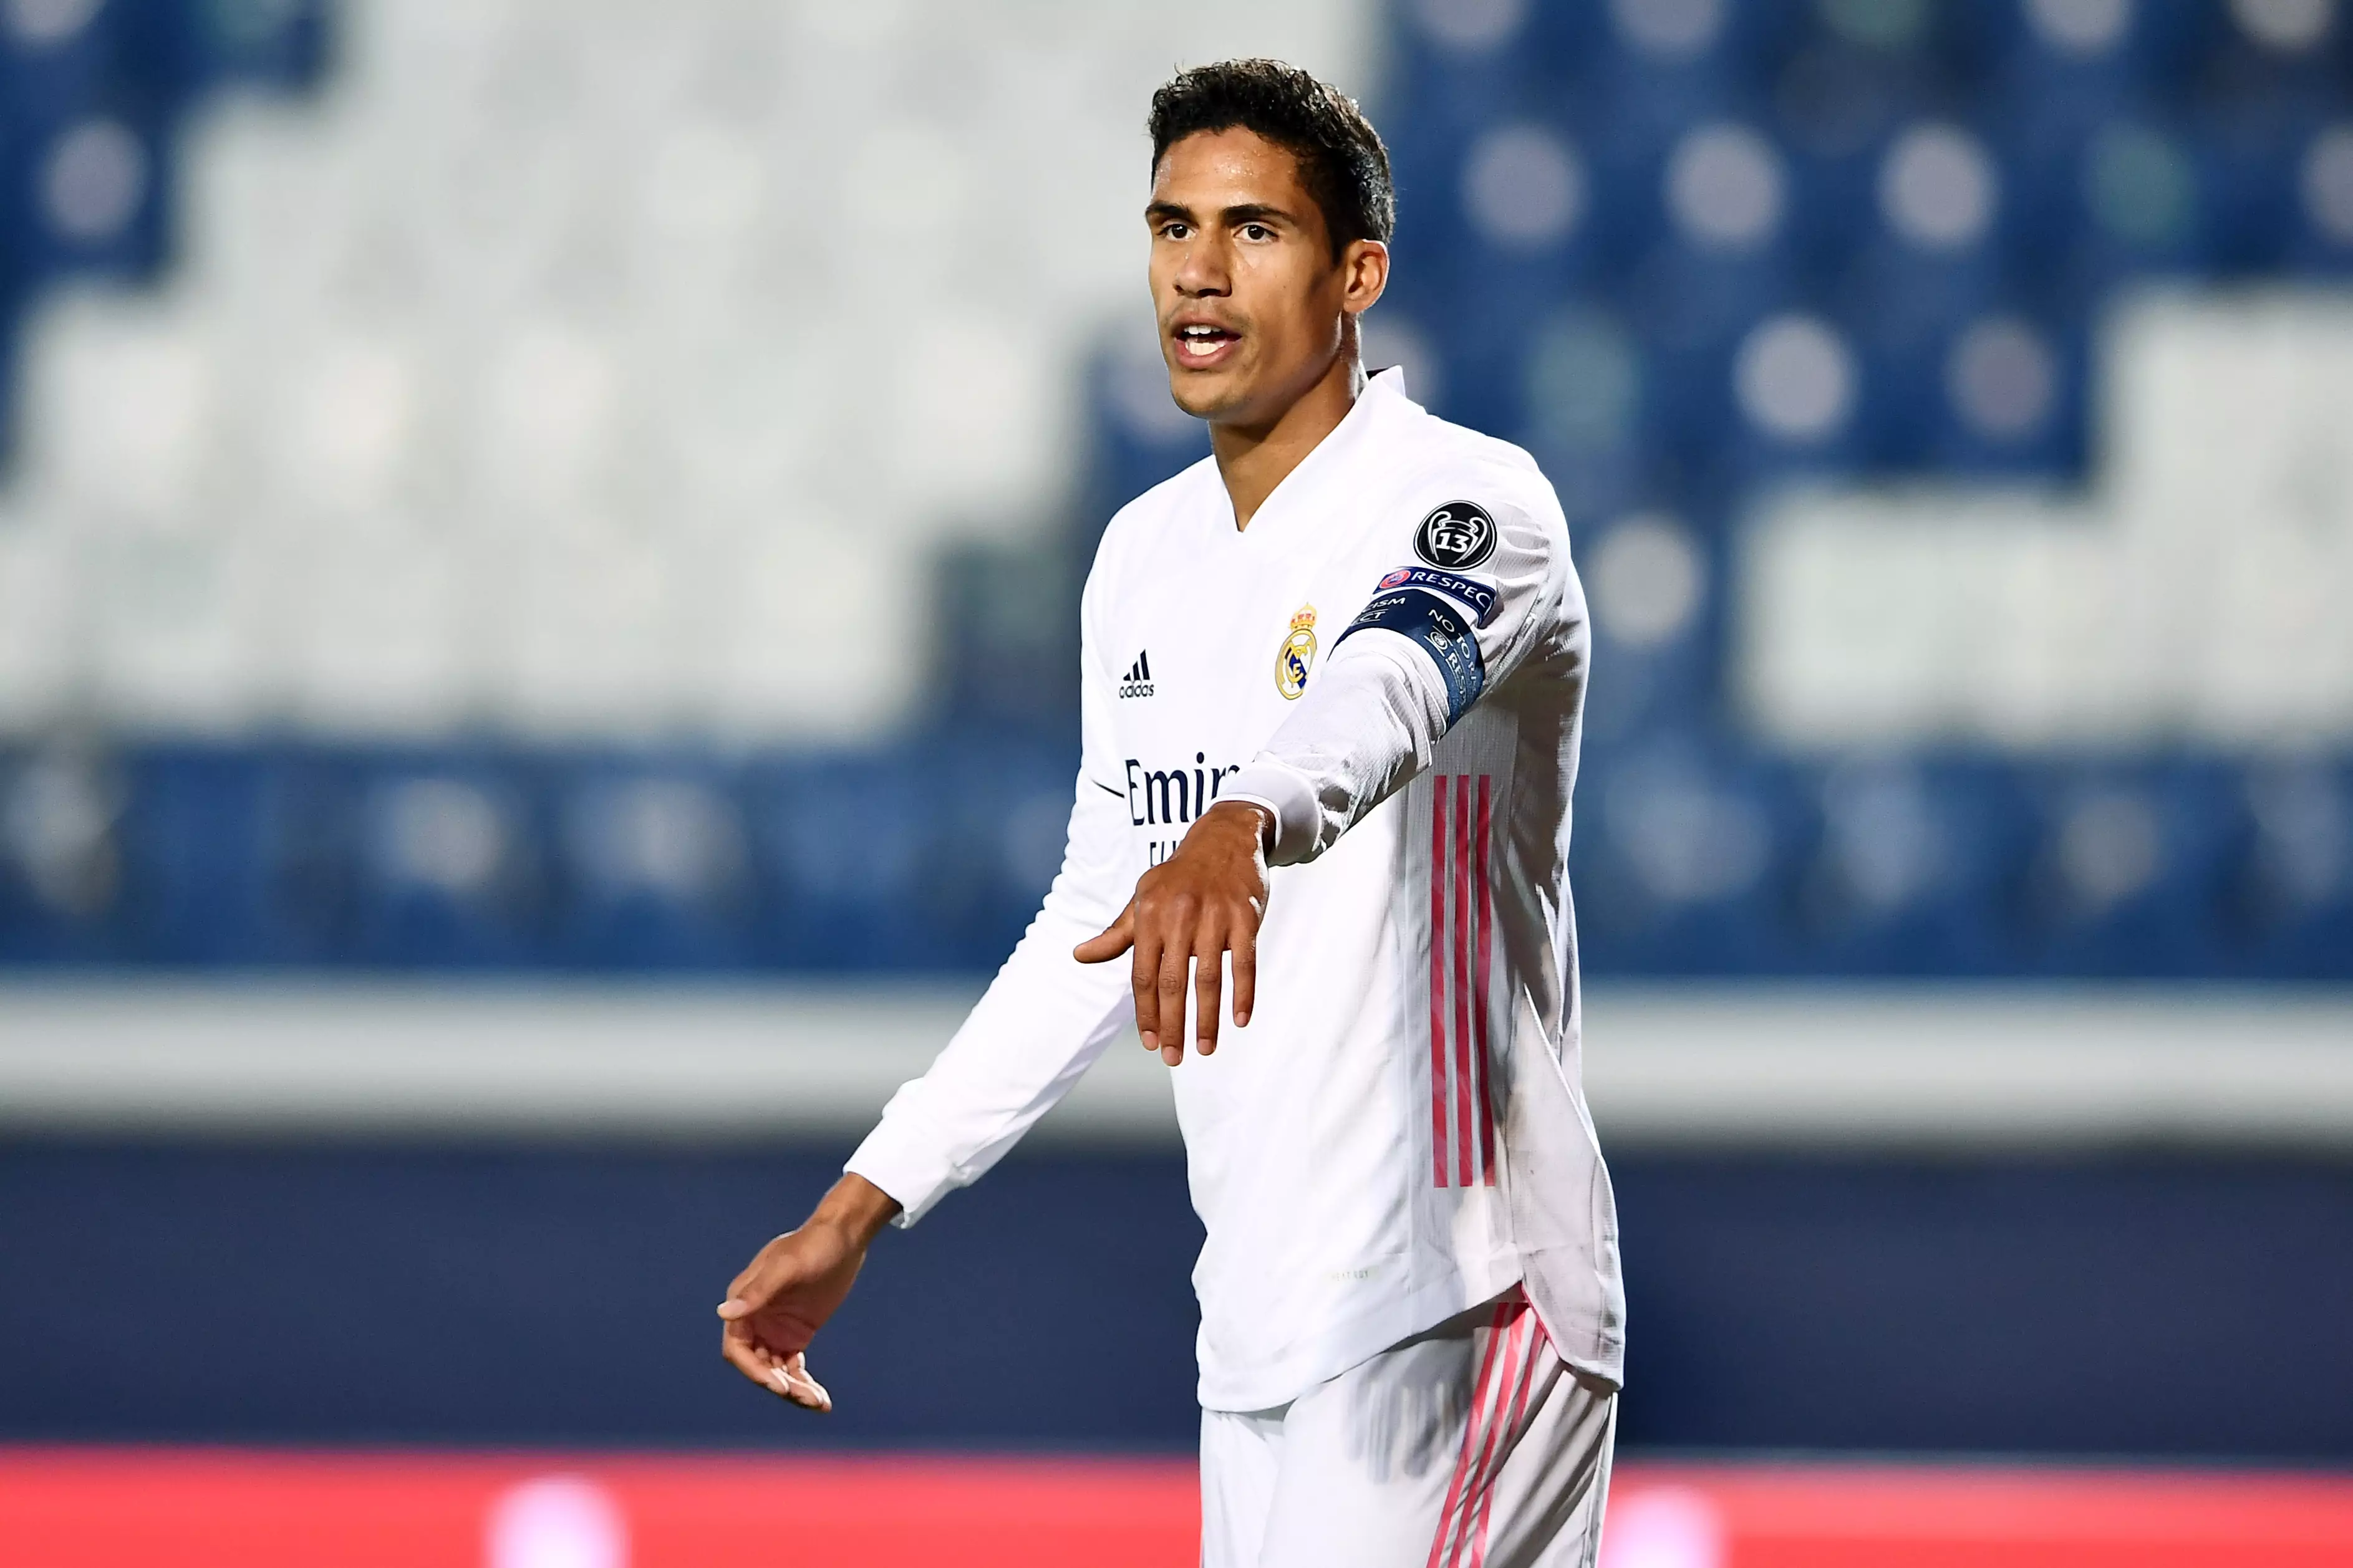 Varane could move to United. Image: PA Images